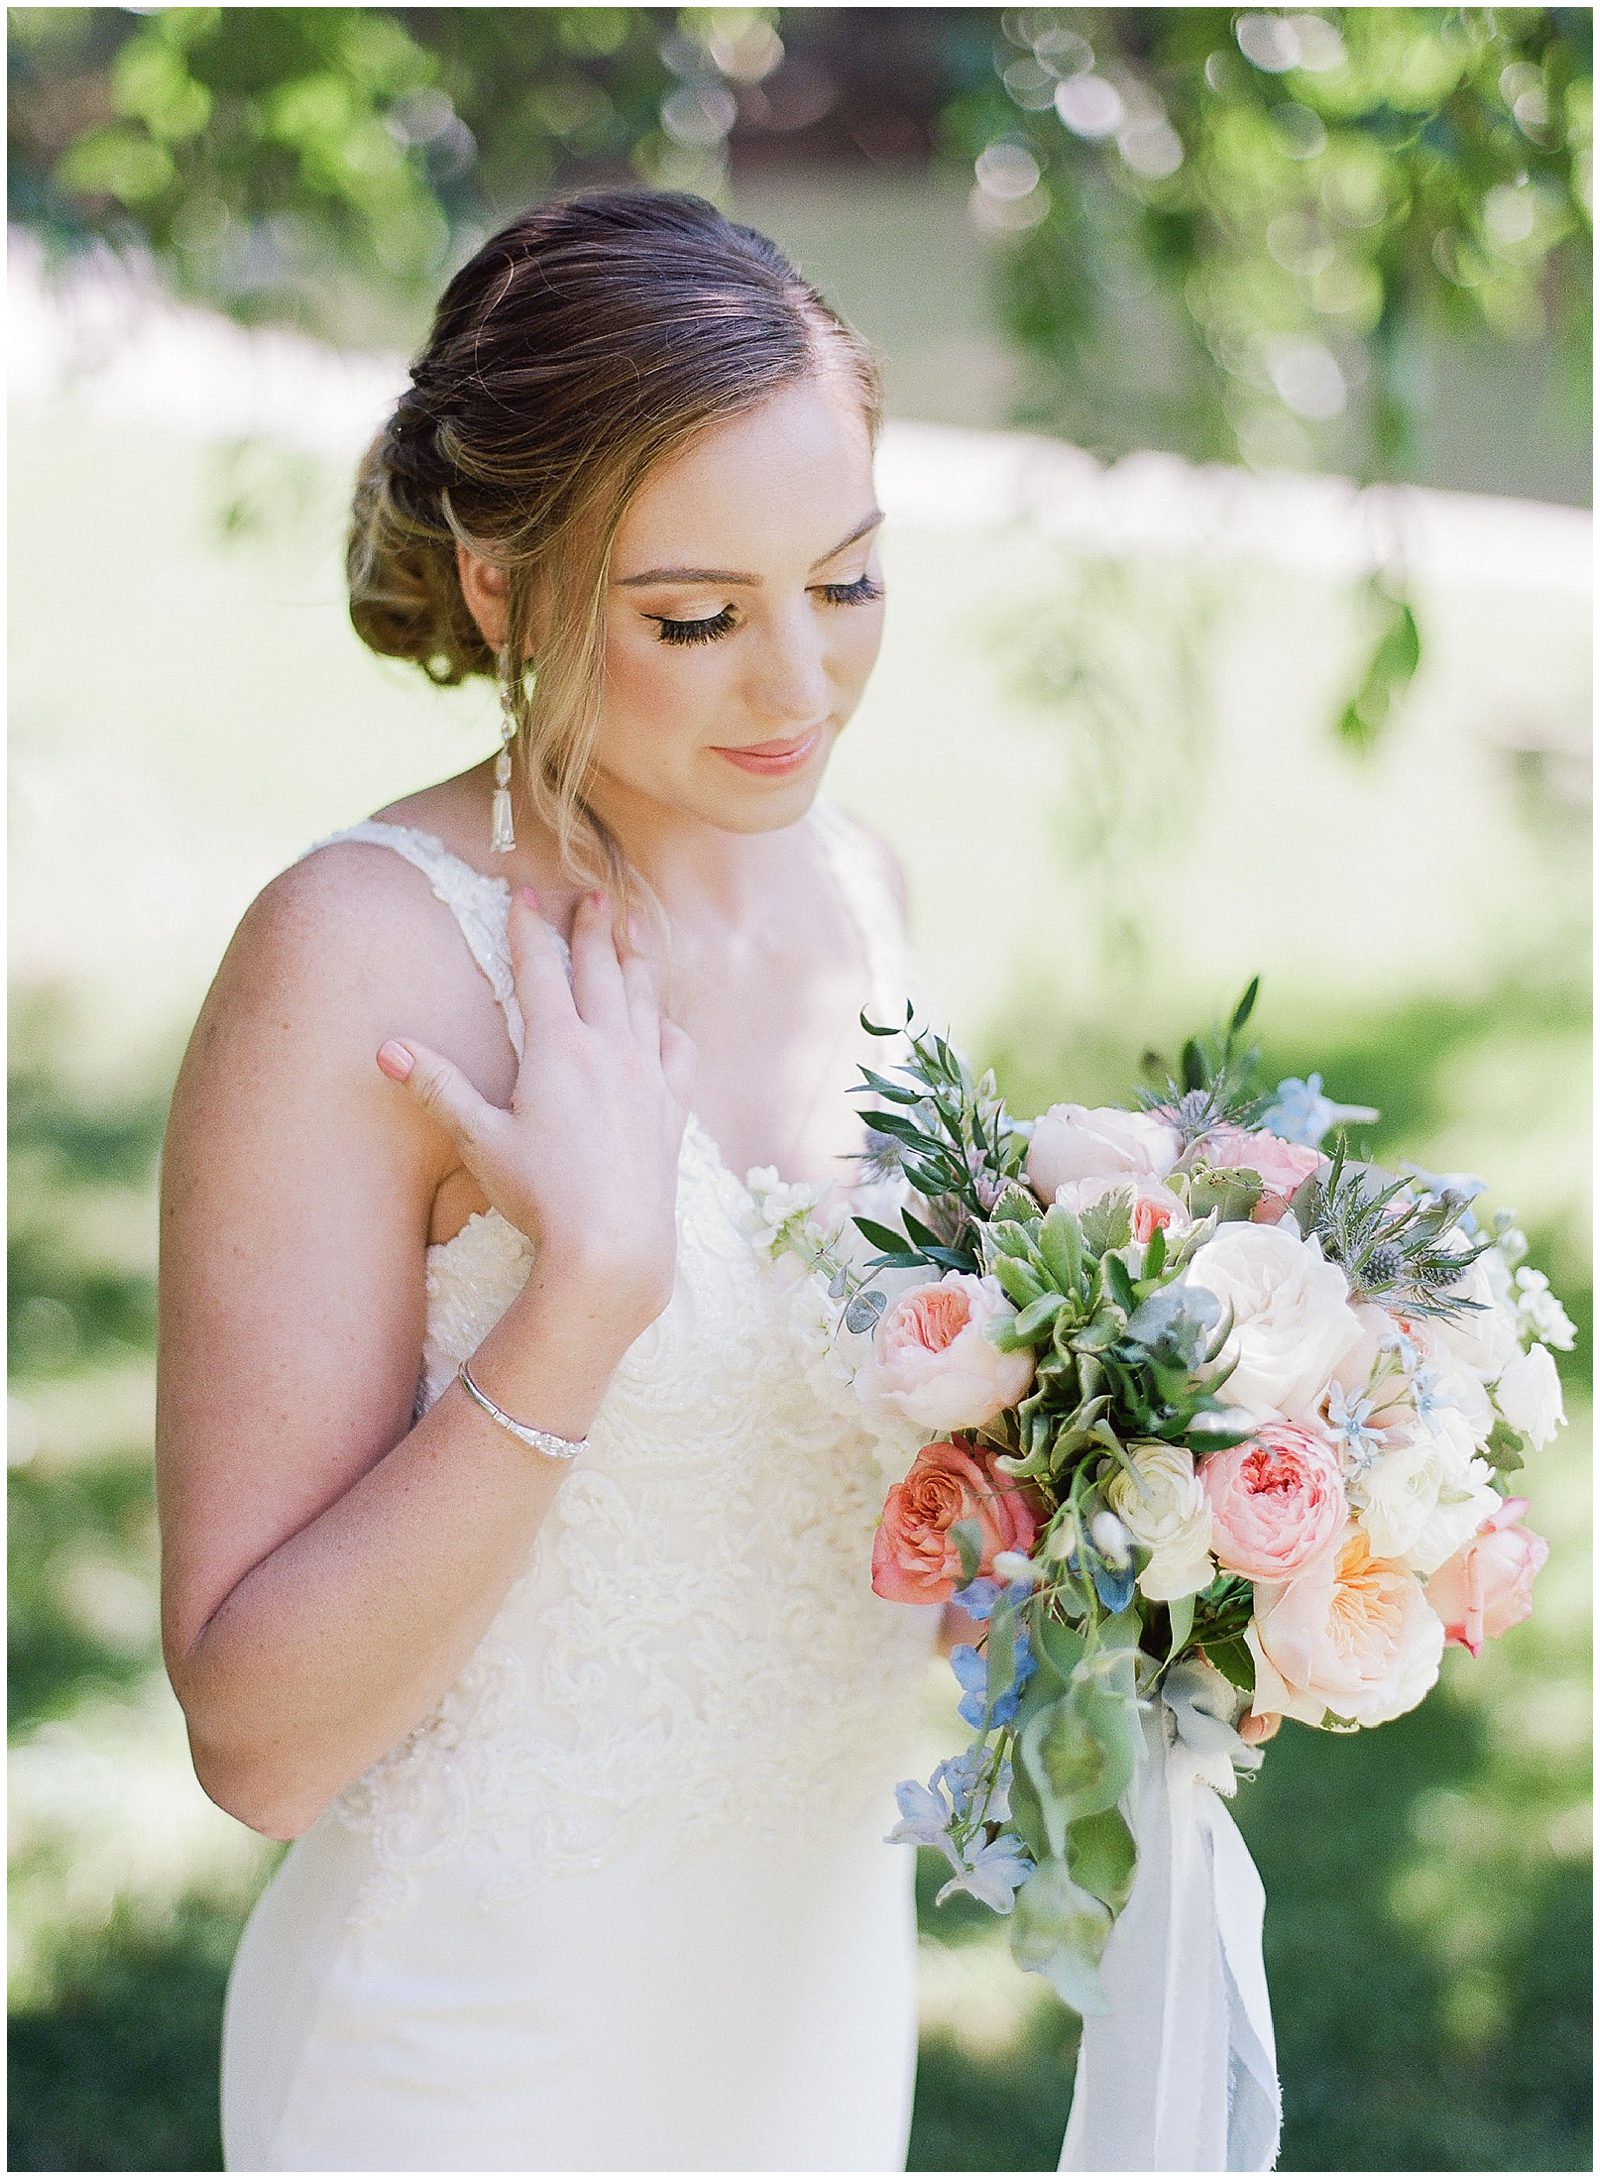 Wedding Colors For Summer Bride Looking Down Holding Bouquet Photo